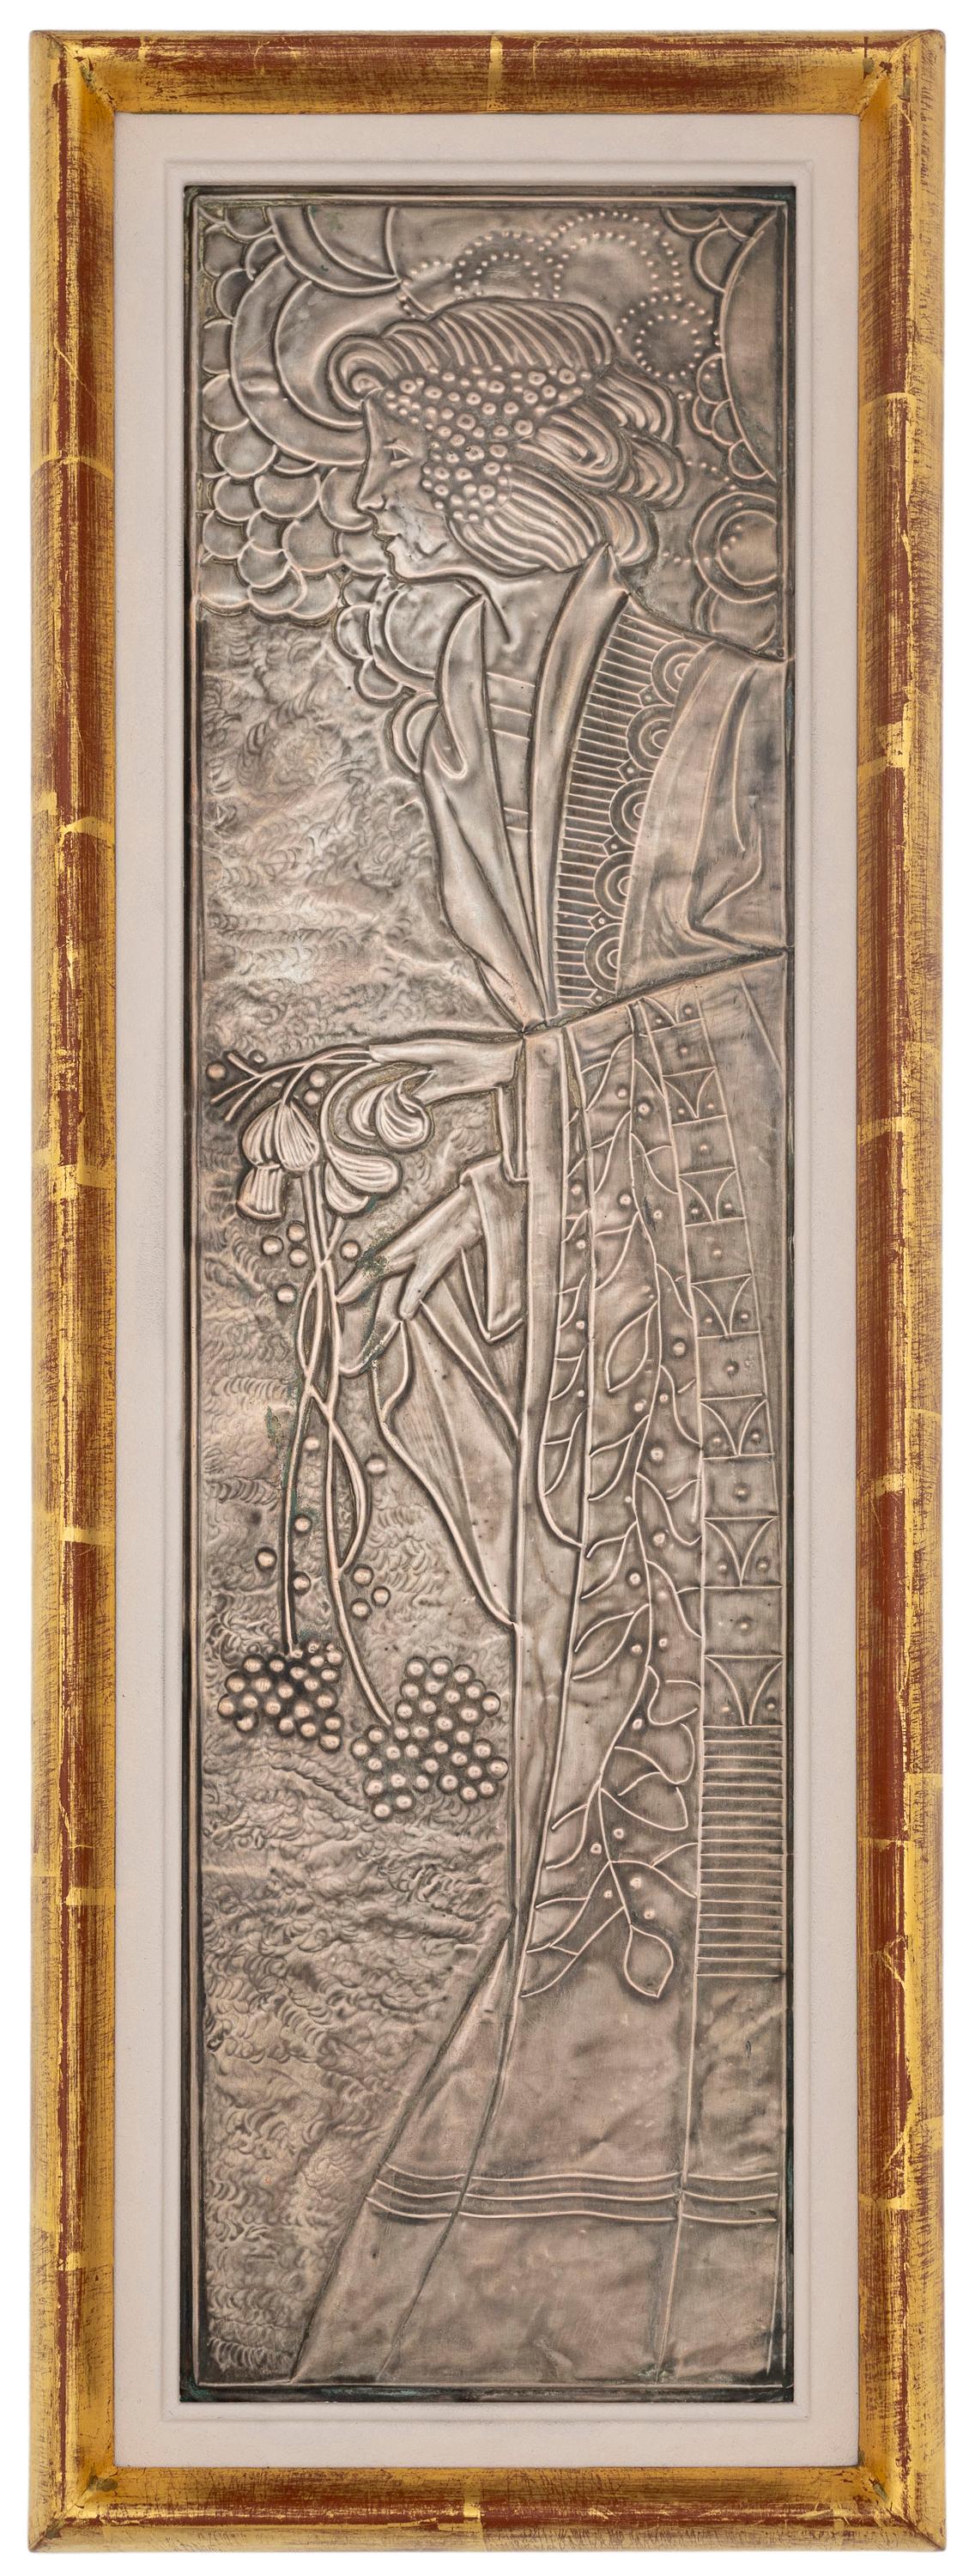 Pair of Reliefs, Dionysus and Demeter, Georg Klimt (1867 - 1931), patinated copper, silver-plated, ca. 1900

Georg Klimt's excellent craftsmanship in metal sculpting was acknowledged and valued by his contemporaries, first and foremost by his older